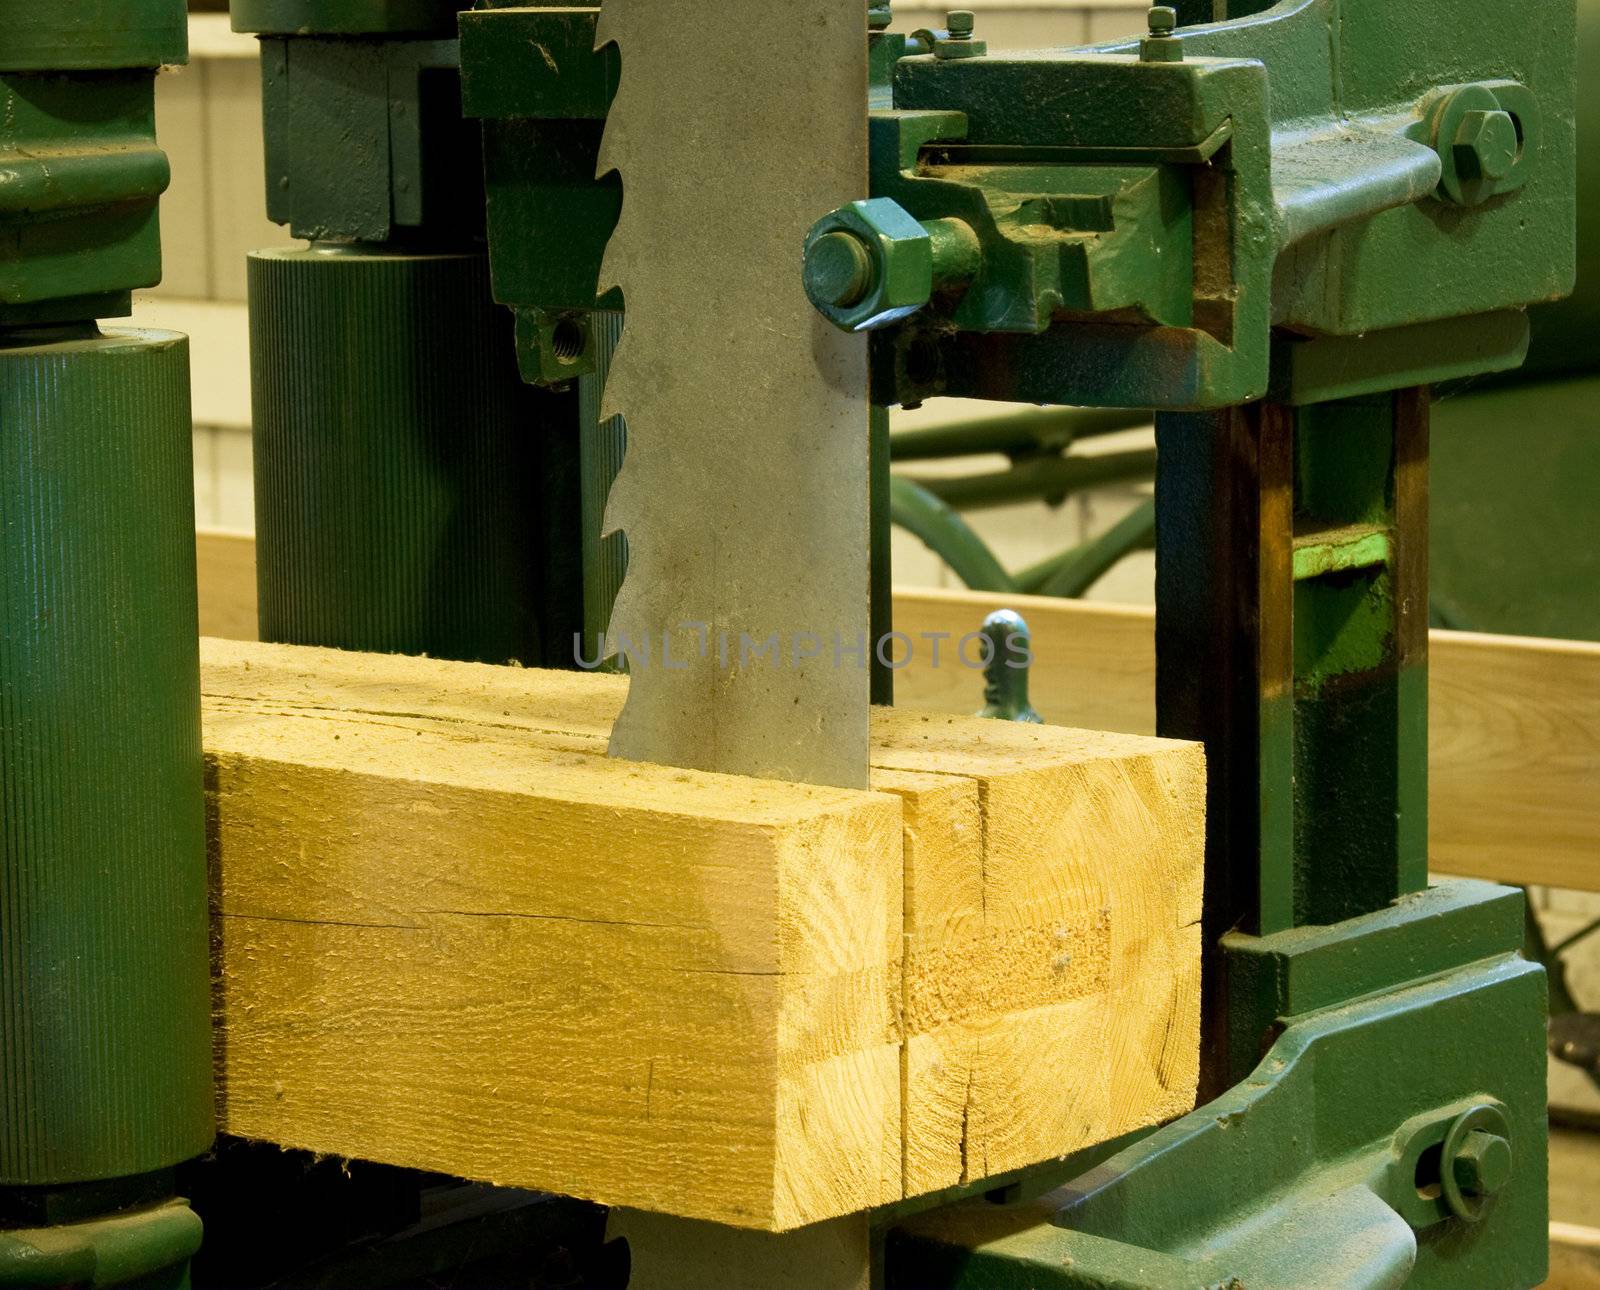 ihdustrial band saw sawmill by dcwcreations